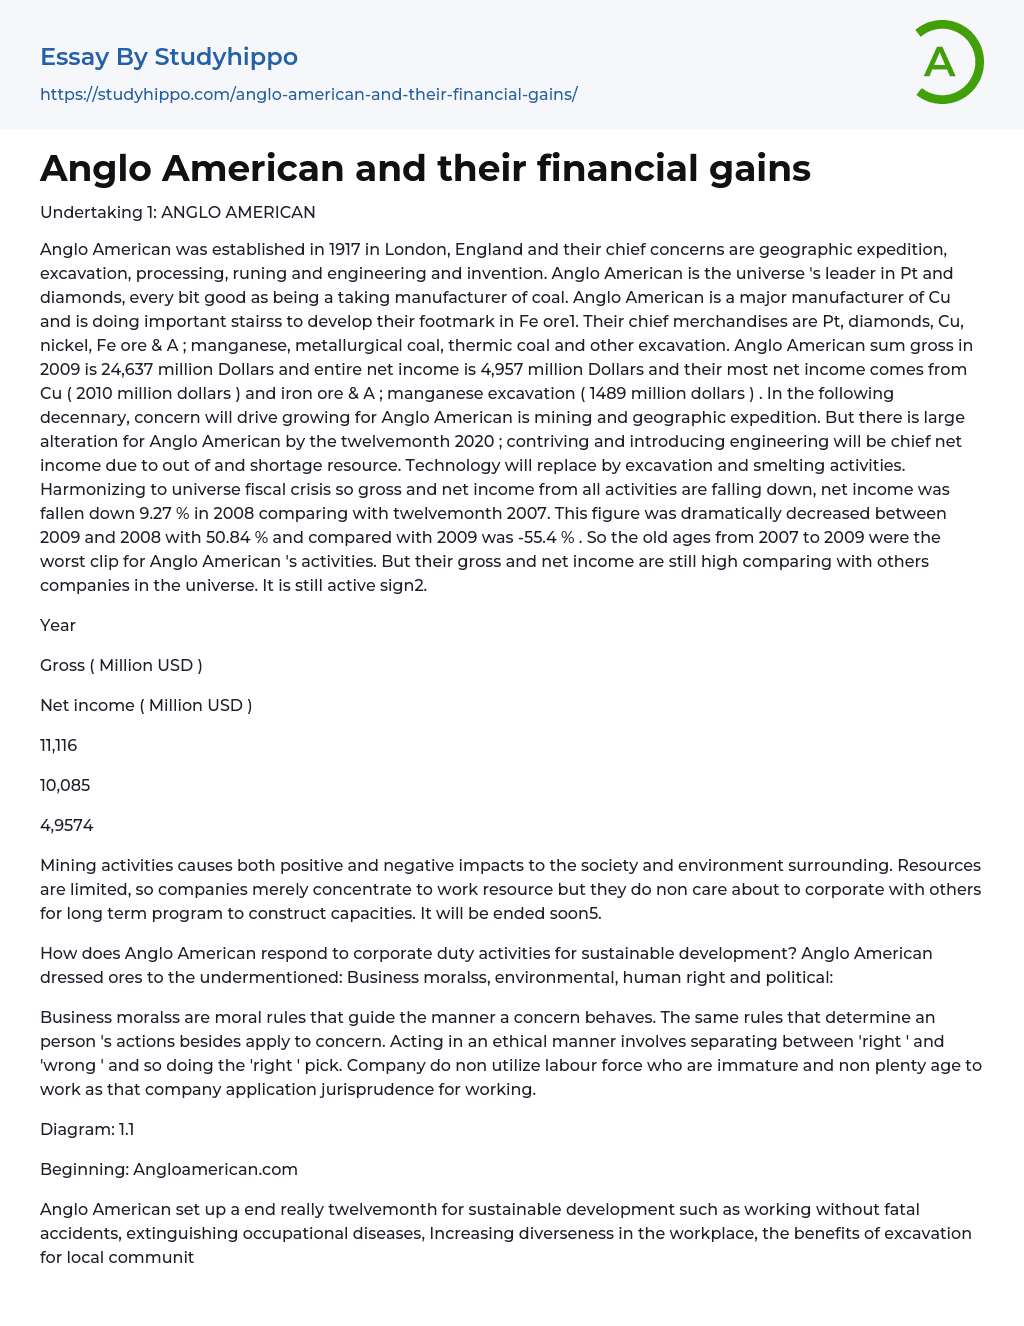 Anglo American and their financial gains Essay Example